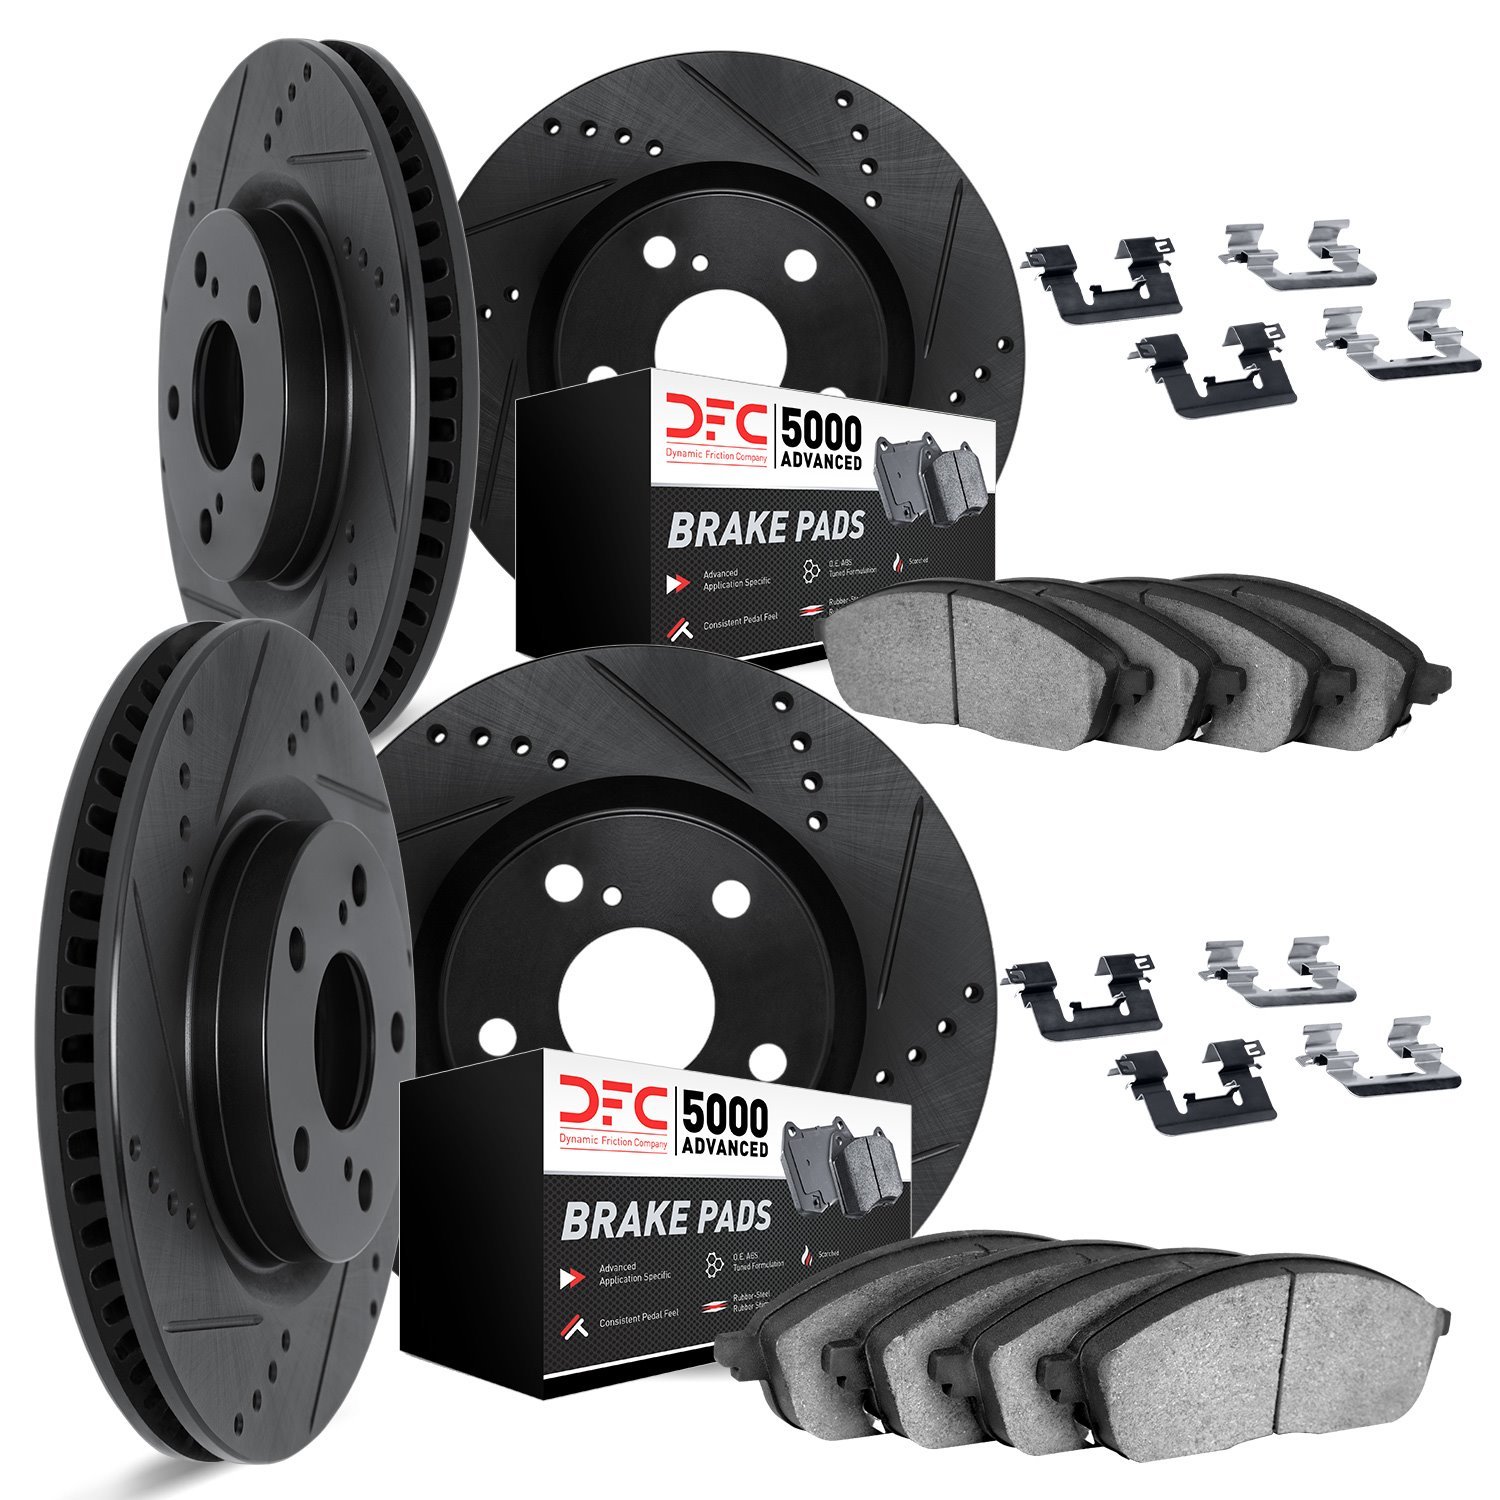 8514-31073 Drilled/Slotted Brake Rotors w/5000 Advanced Brake Pads Kit & Hardware [Black], 2014-2019 BMW, Position: Front and Re